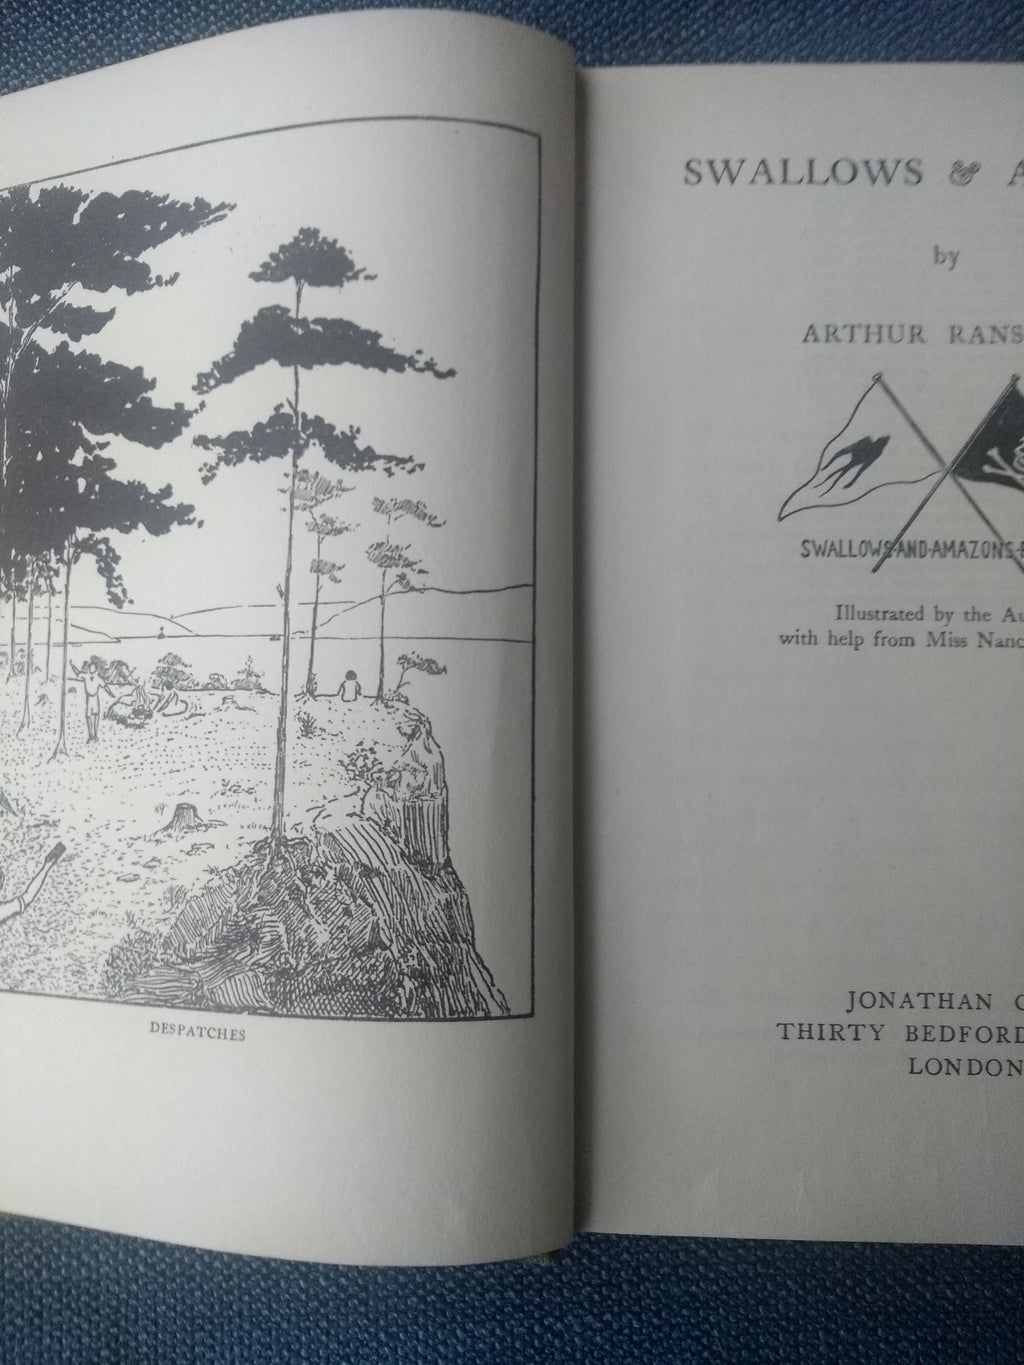 Swallows and Amazons, by Arthur Ransome